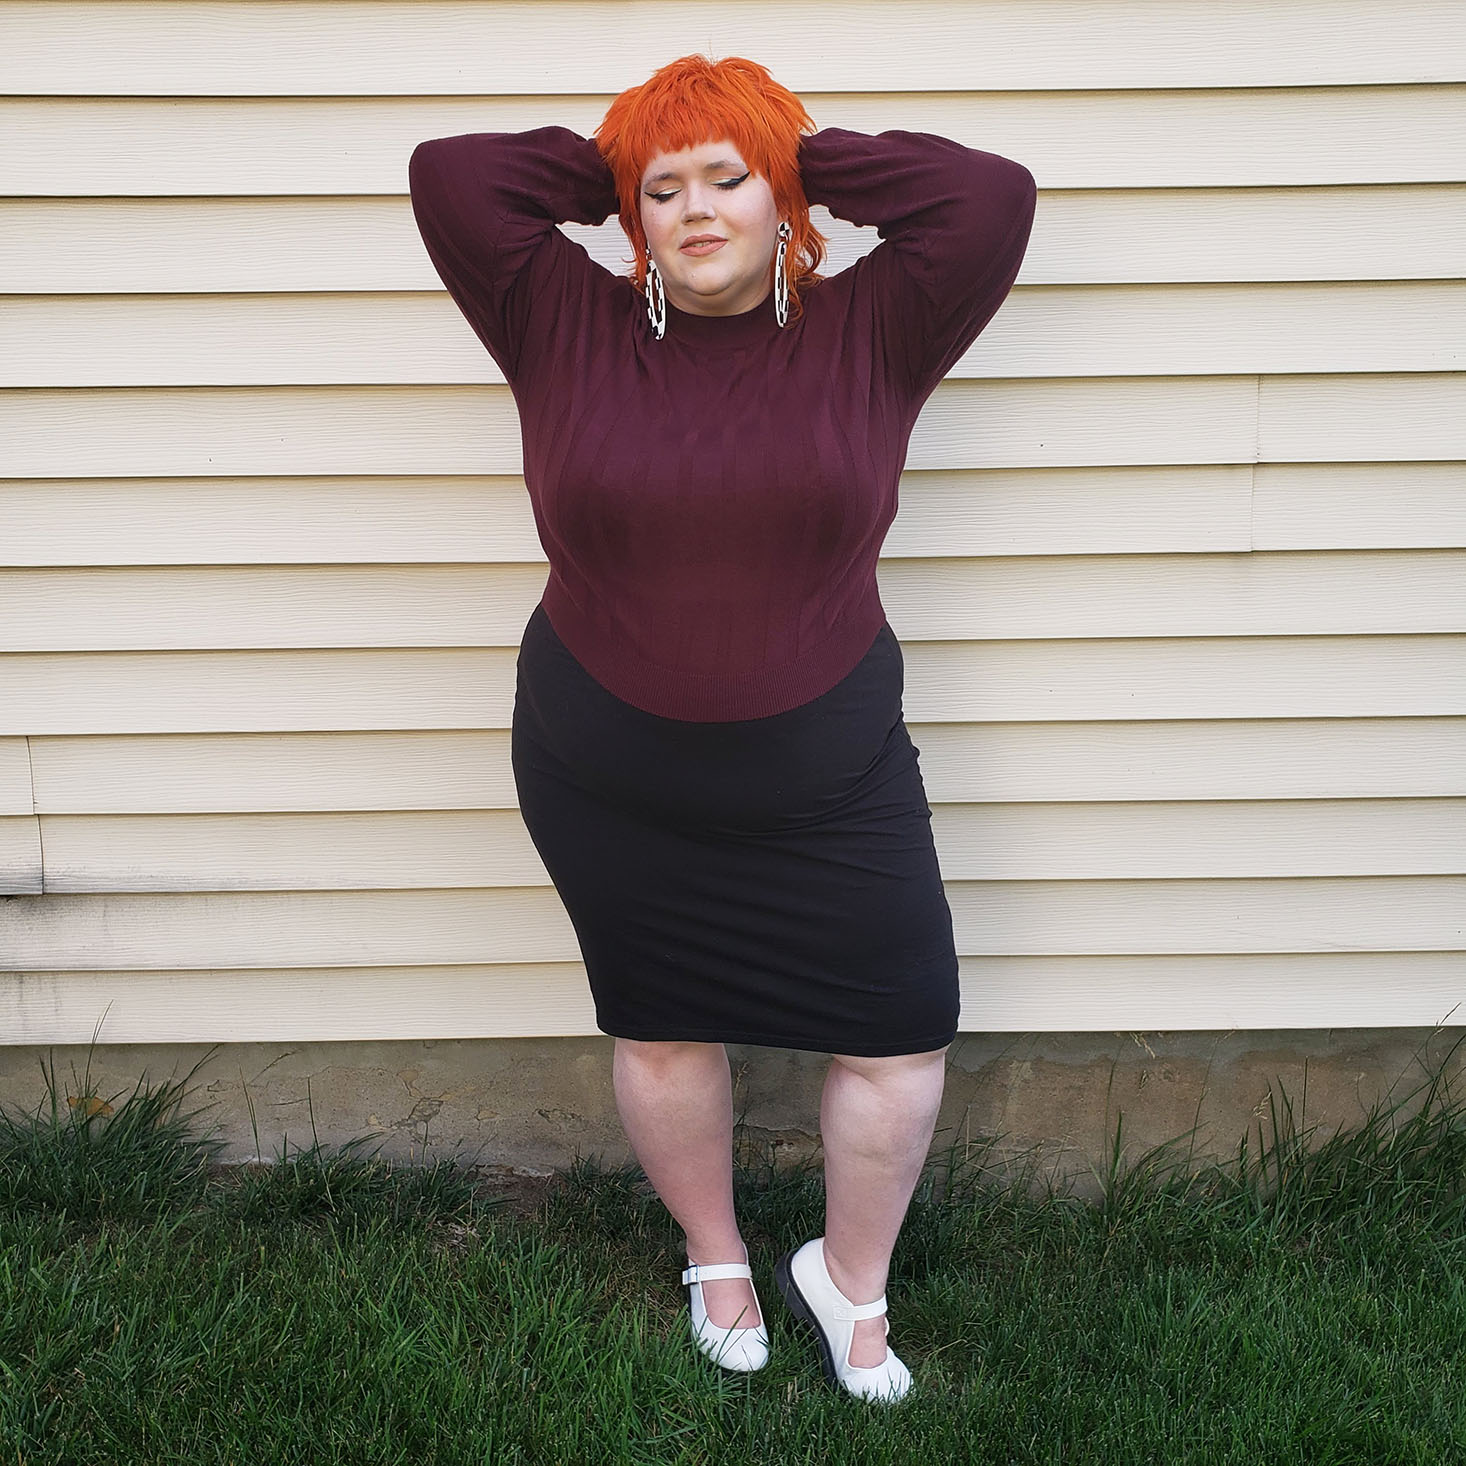 Gwynnie Bee Plus Size Clothing Review + Coupon – August 2021